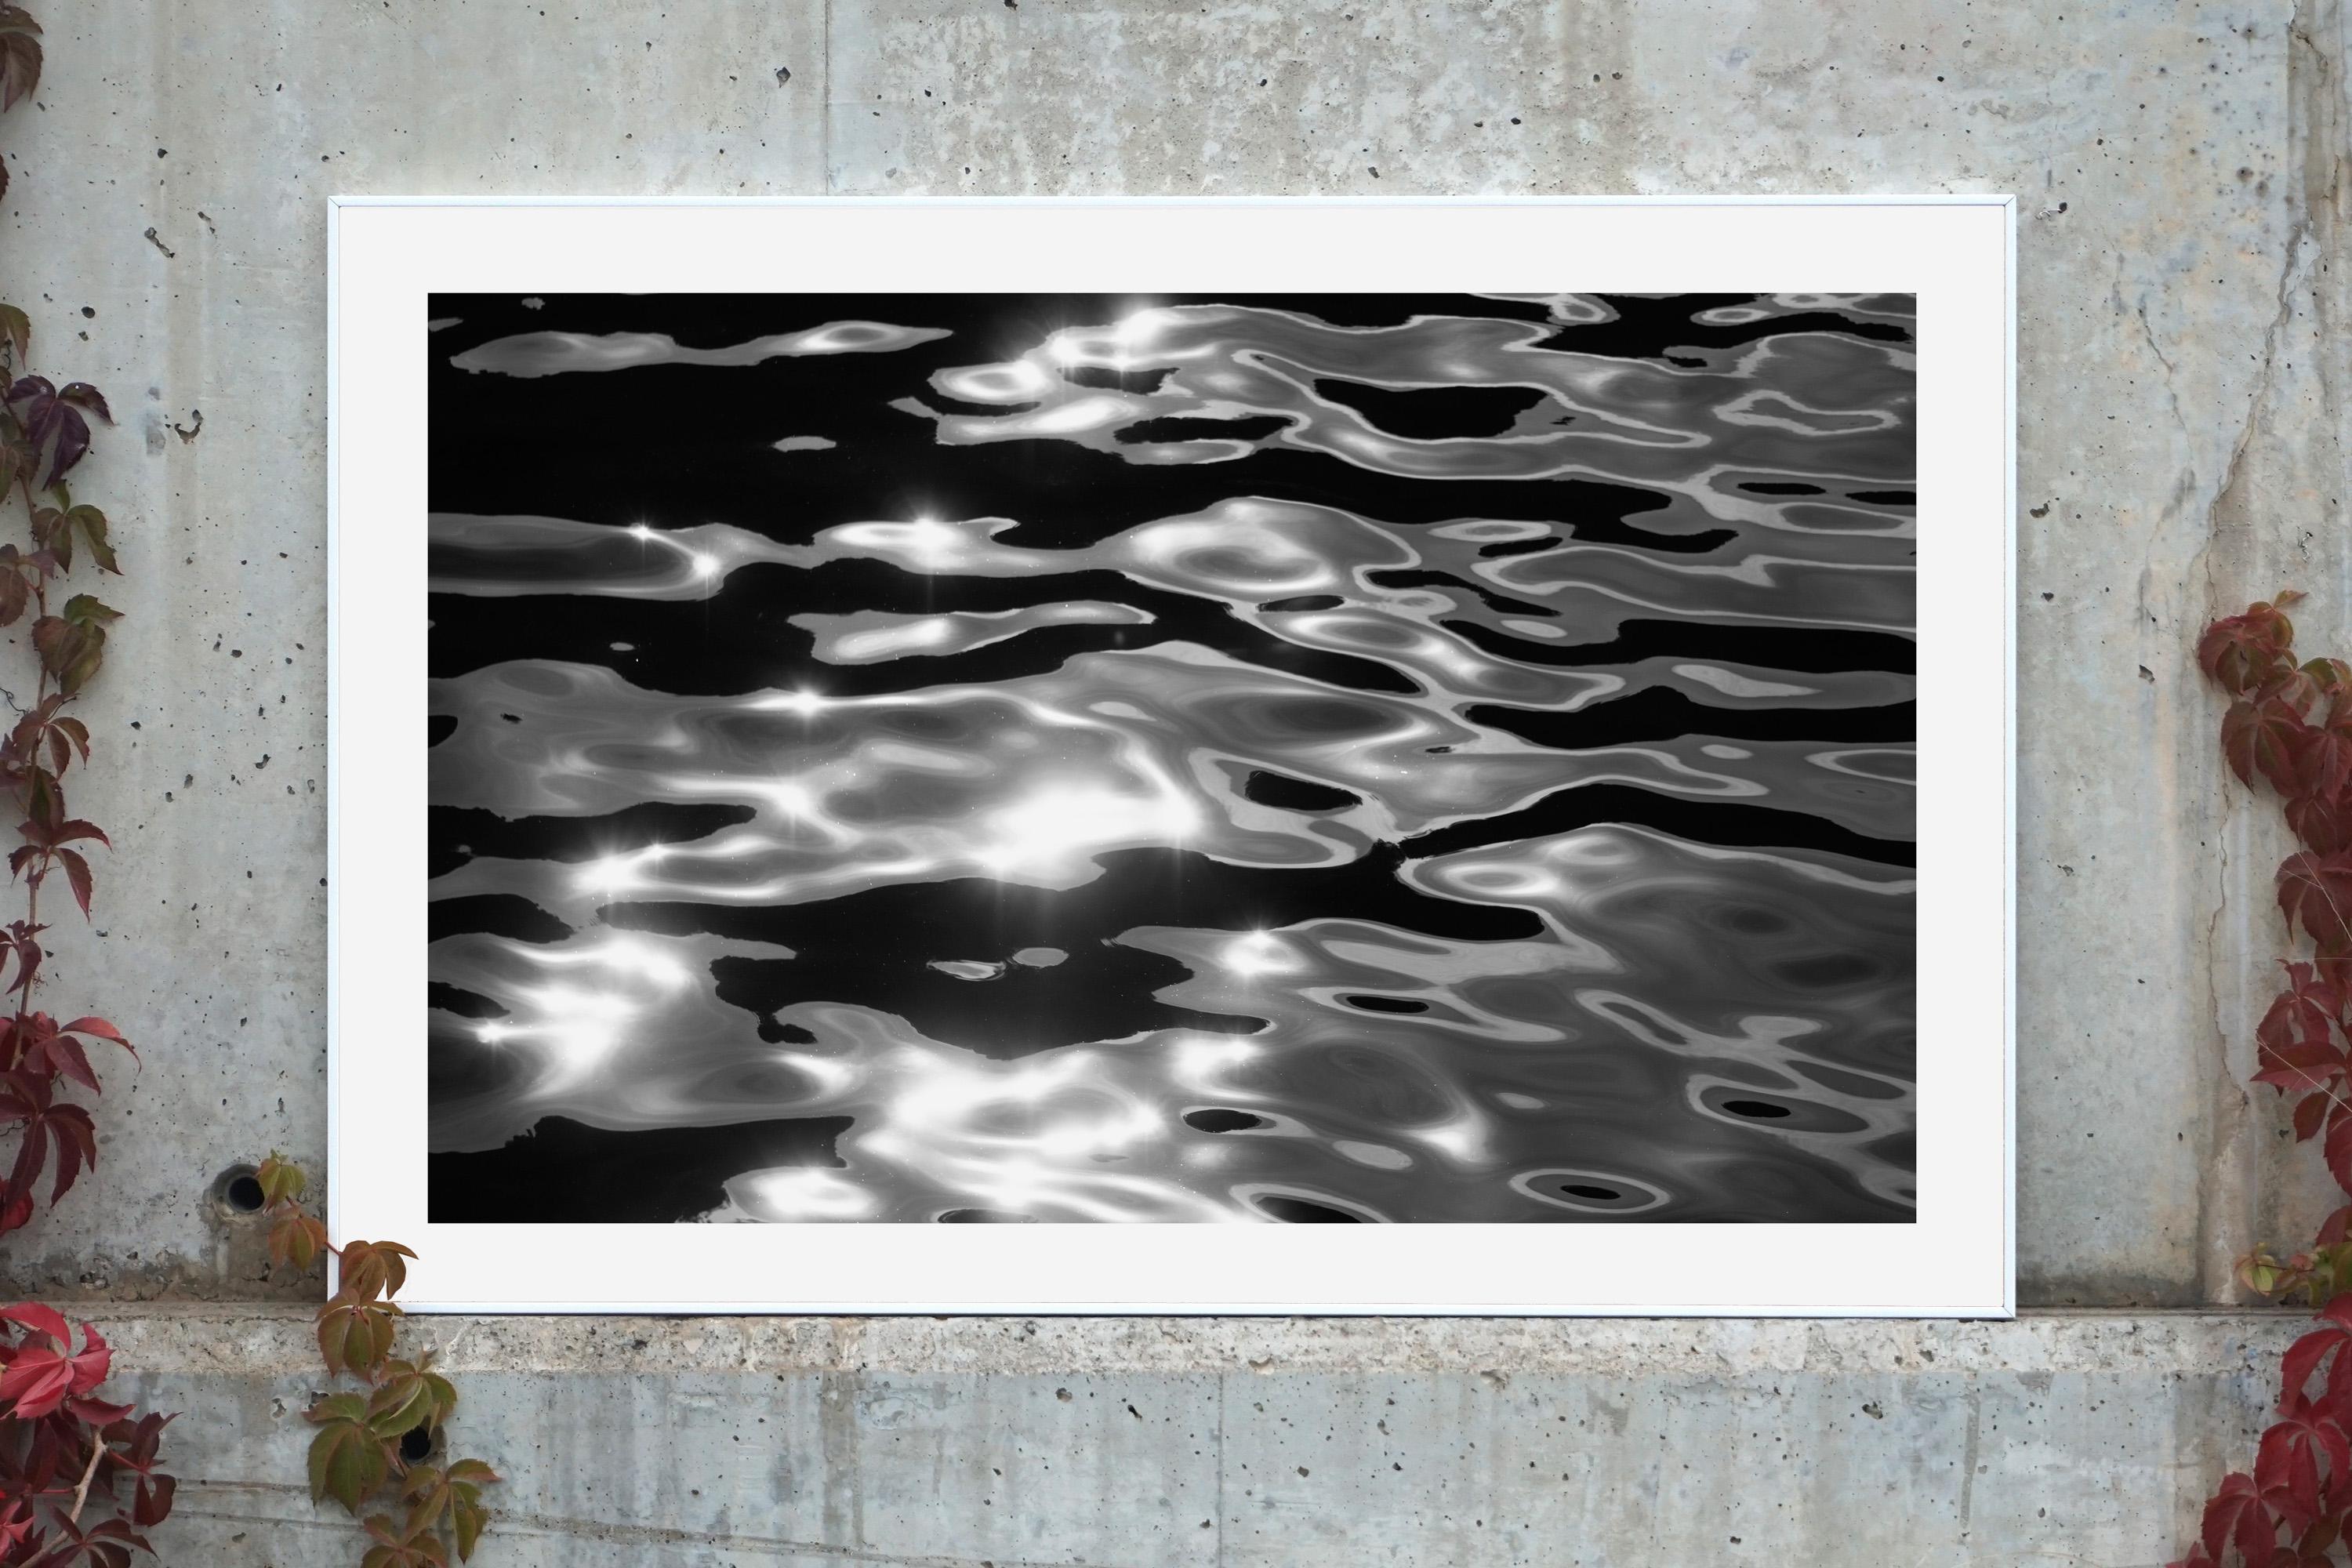  Reflections of Lido Island, Abstract Venice Waters, Large Black White Seascape - Photograph by Kind of Cyan